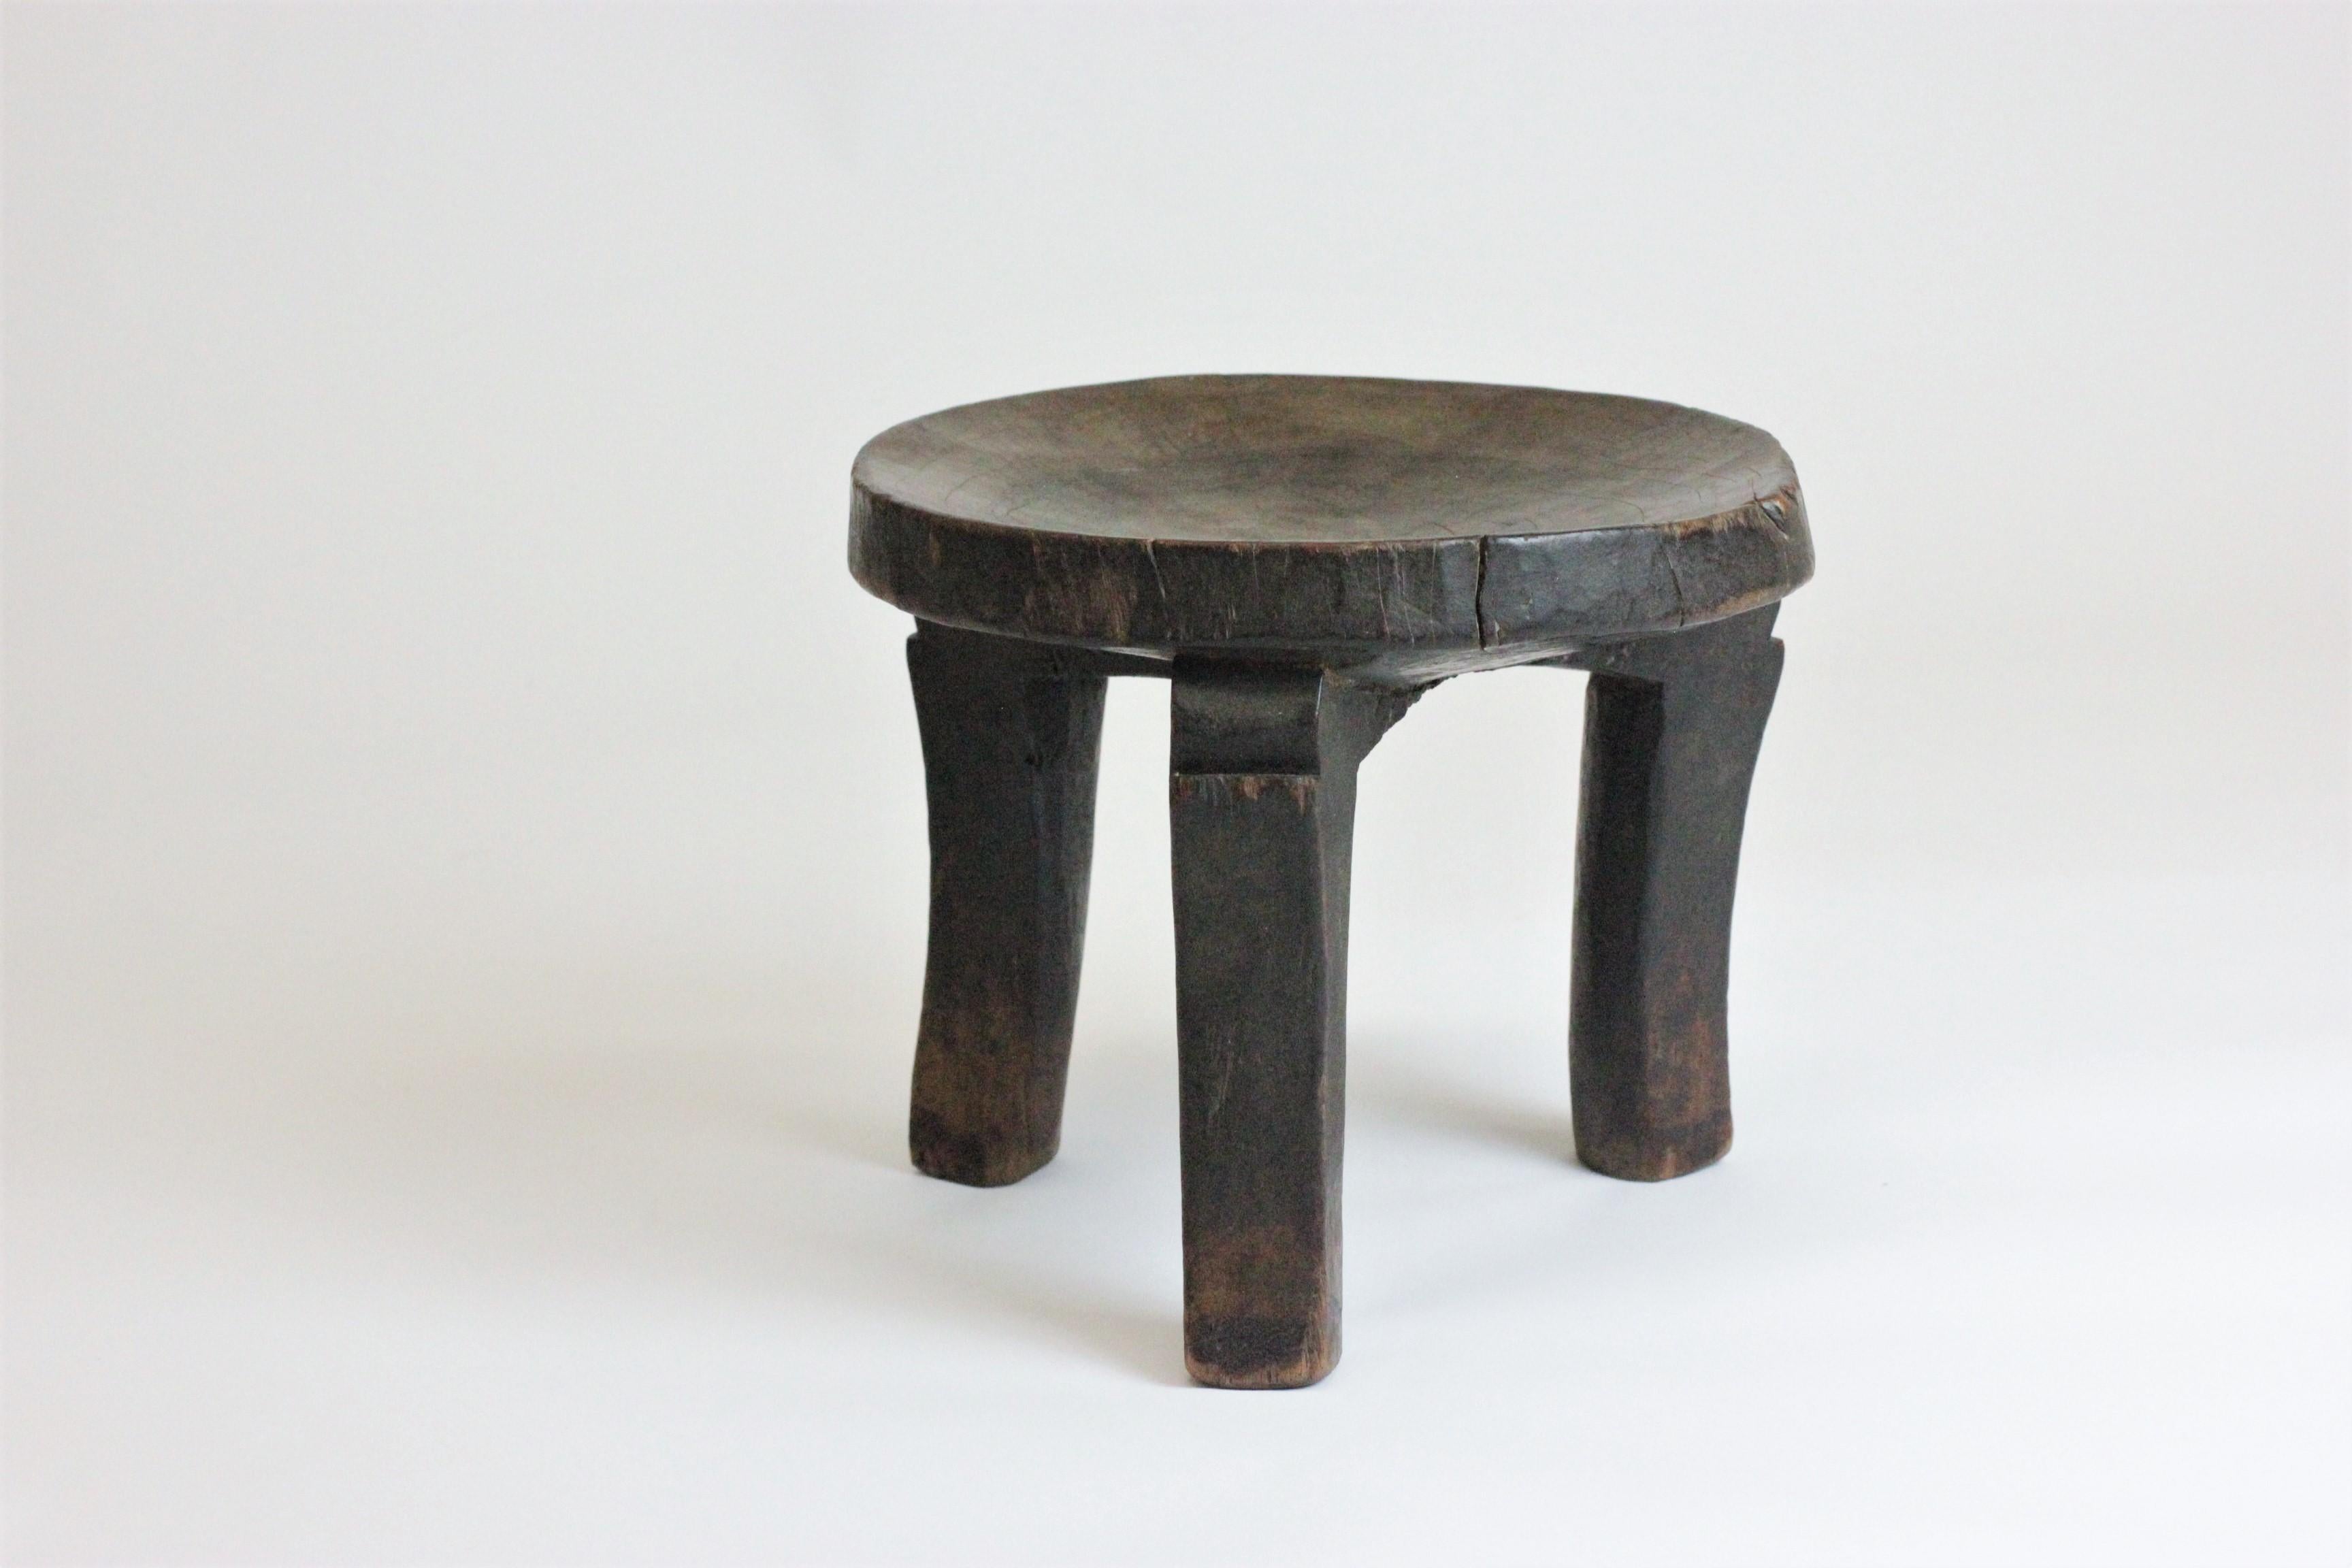 hand carved antique African decorative tribal footrest stool approximately 120 years old. This solid wood stool was originally handmade specifically for a person; such stools and Craft were typically viewed as a status symbol. The item remains